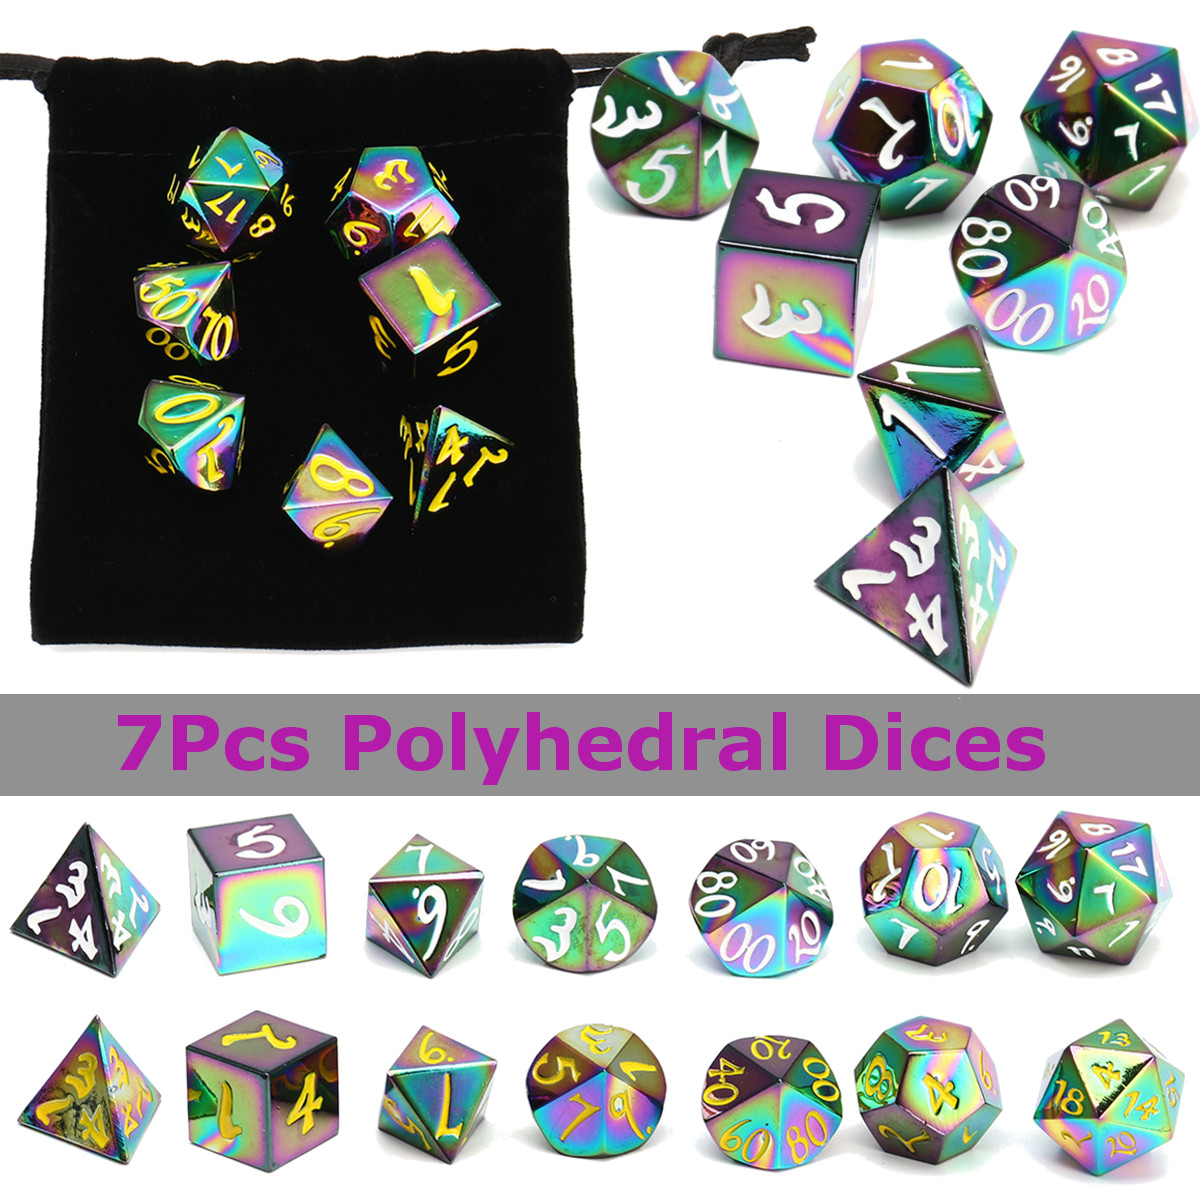 7Pcs-Antique-Metal-Polyhedral-Dices-Set-Role-Playing-Game-Gadget-With-Bag-1287723-2